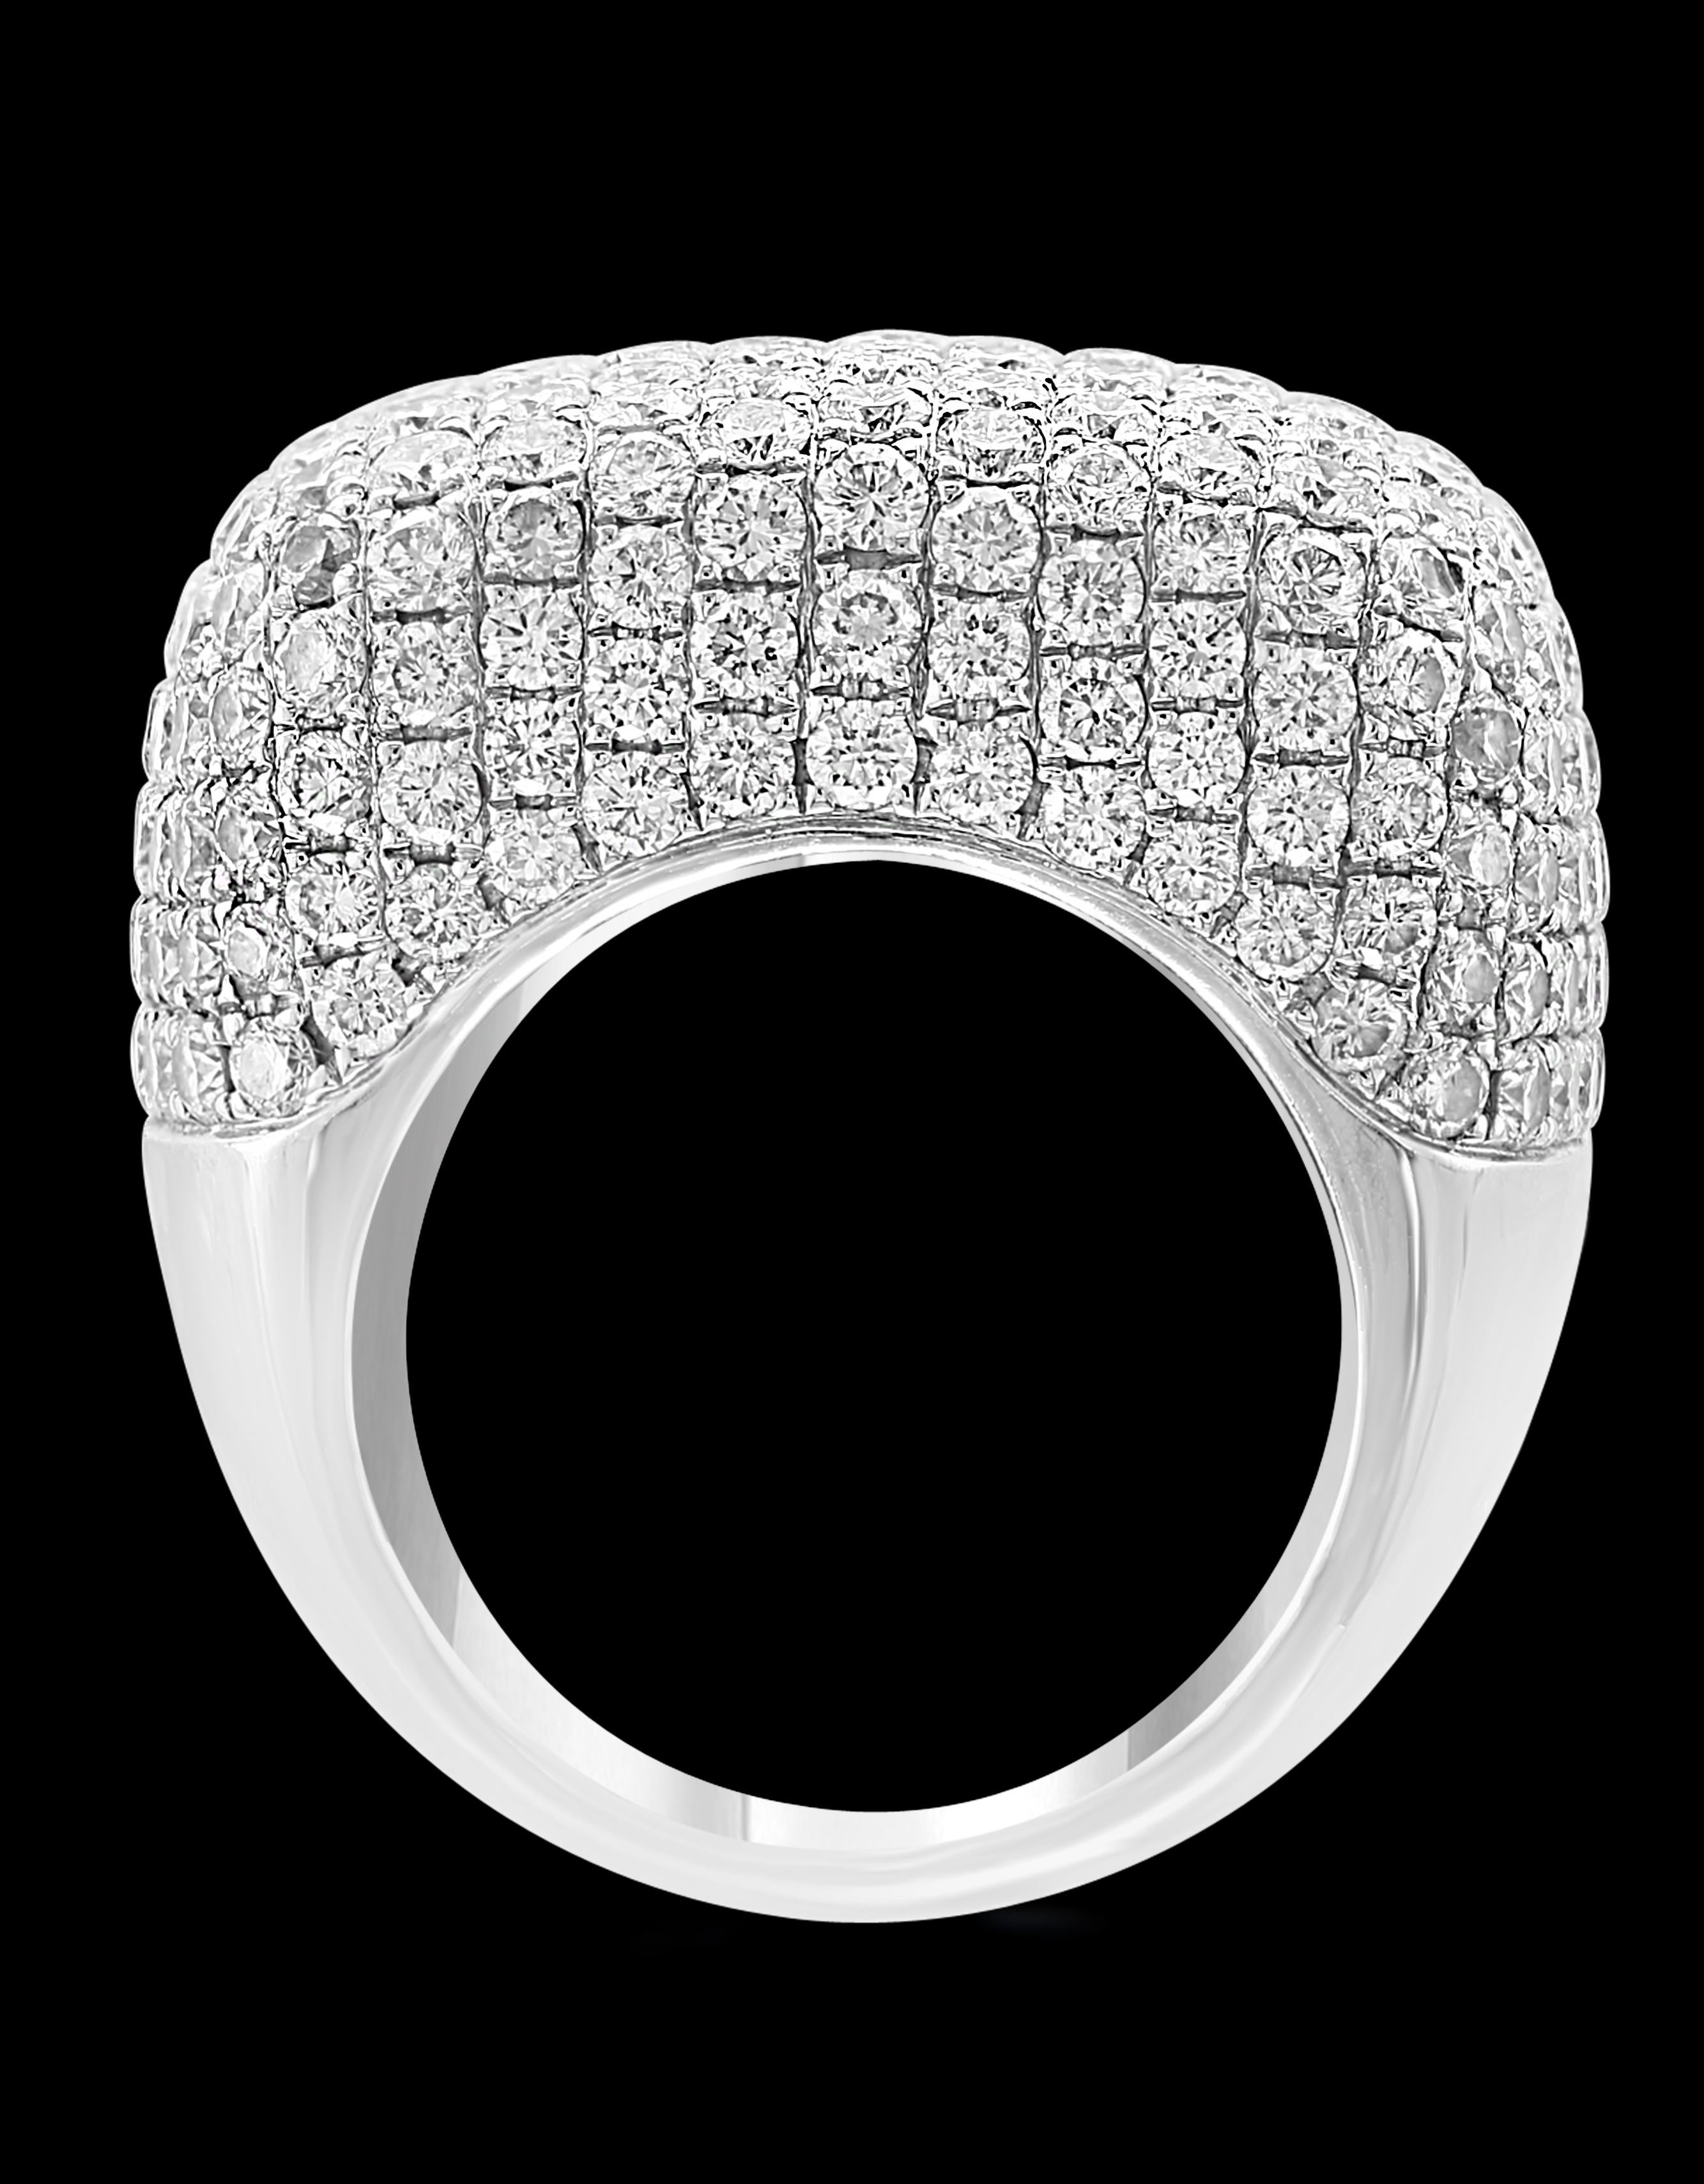 9 Carat Pave Diamonds VS Quality E Color  Cocktail 18 Kt White Gold Ring Estate
Amazing shine and design cocktail ring. 
9 Carat Diamonds VS quality   E color Cocktail  18 K Gold Ring estate

This is a Dome shape cocktail ring  from our premium